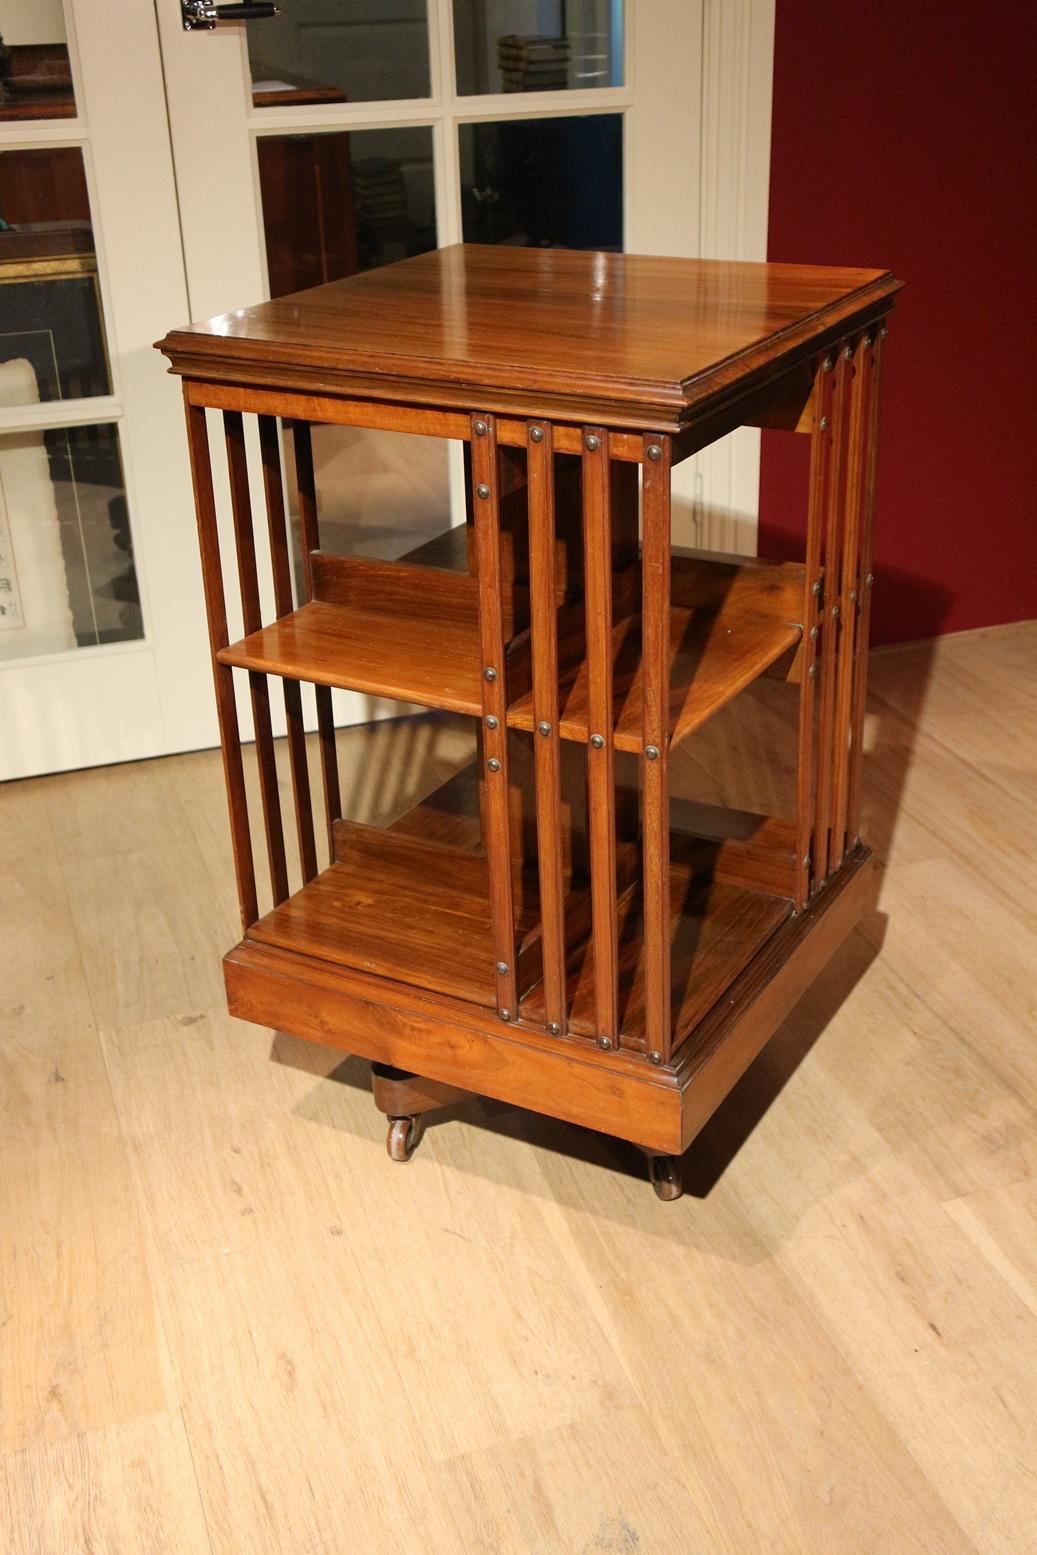 Beautiful antique walnut revolving bookcase. Superb quality revolving bookcase of the famous 19th century English furniture maker Maple & Co. with the typical cast iron base. Very stabile and solid revolving bookcase. Nice color and